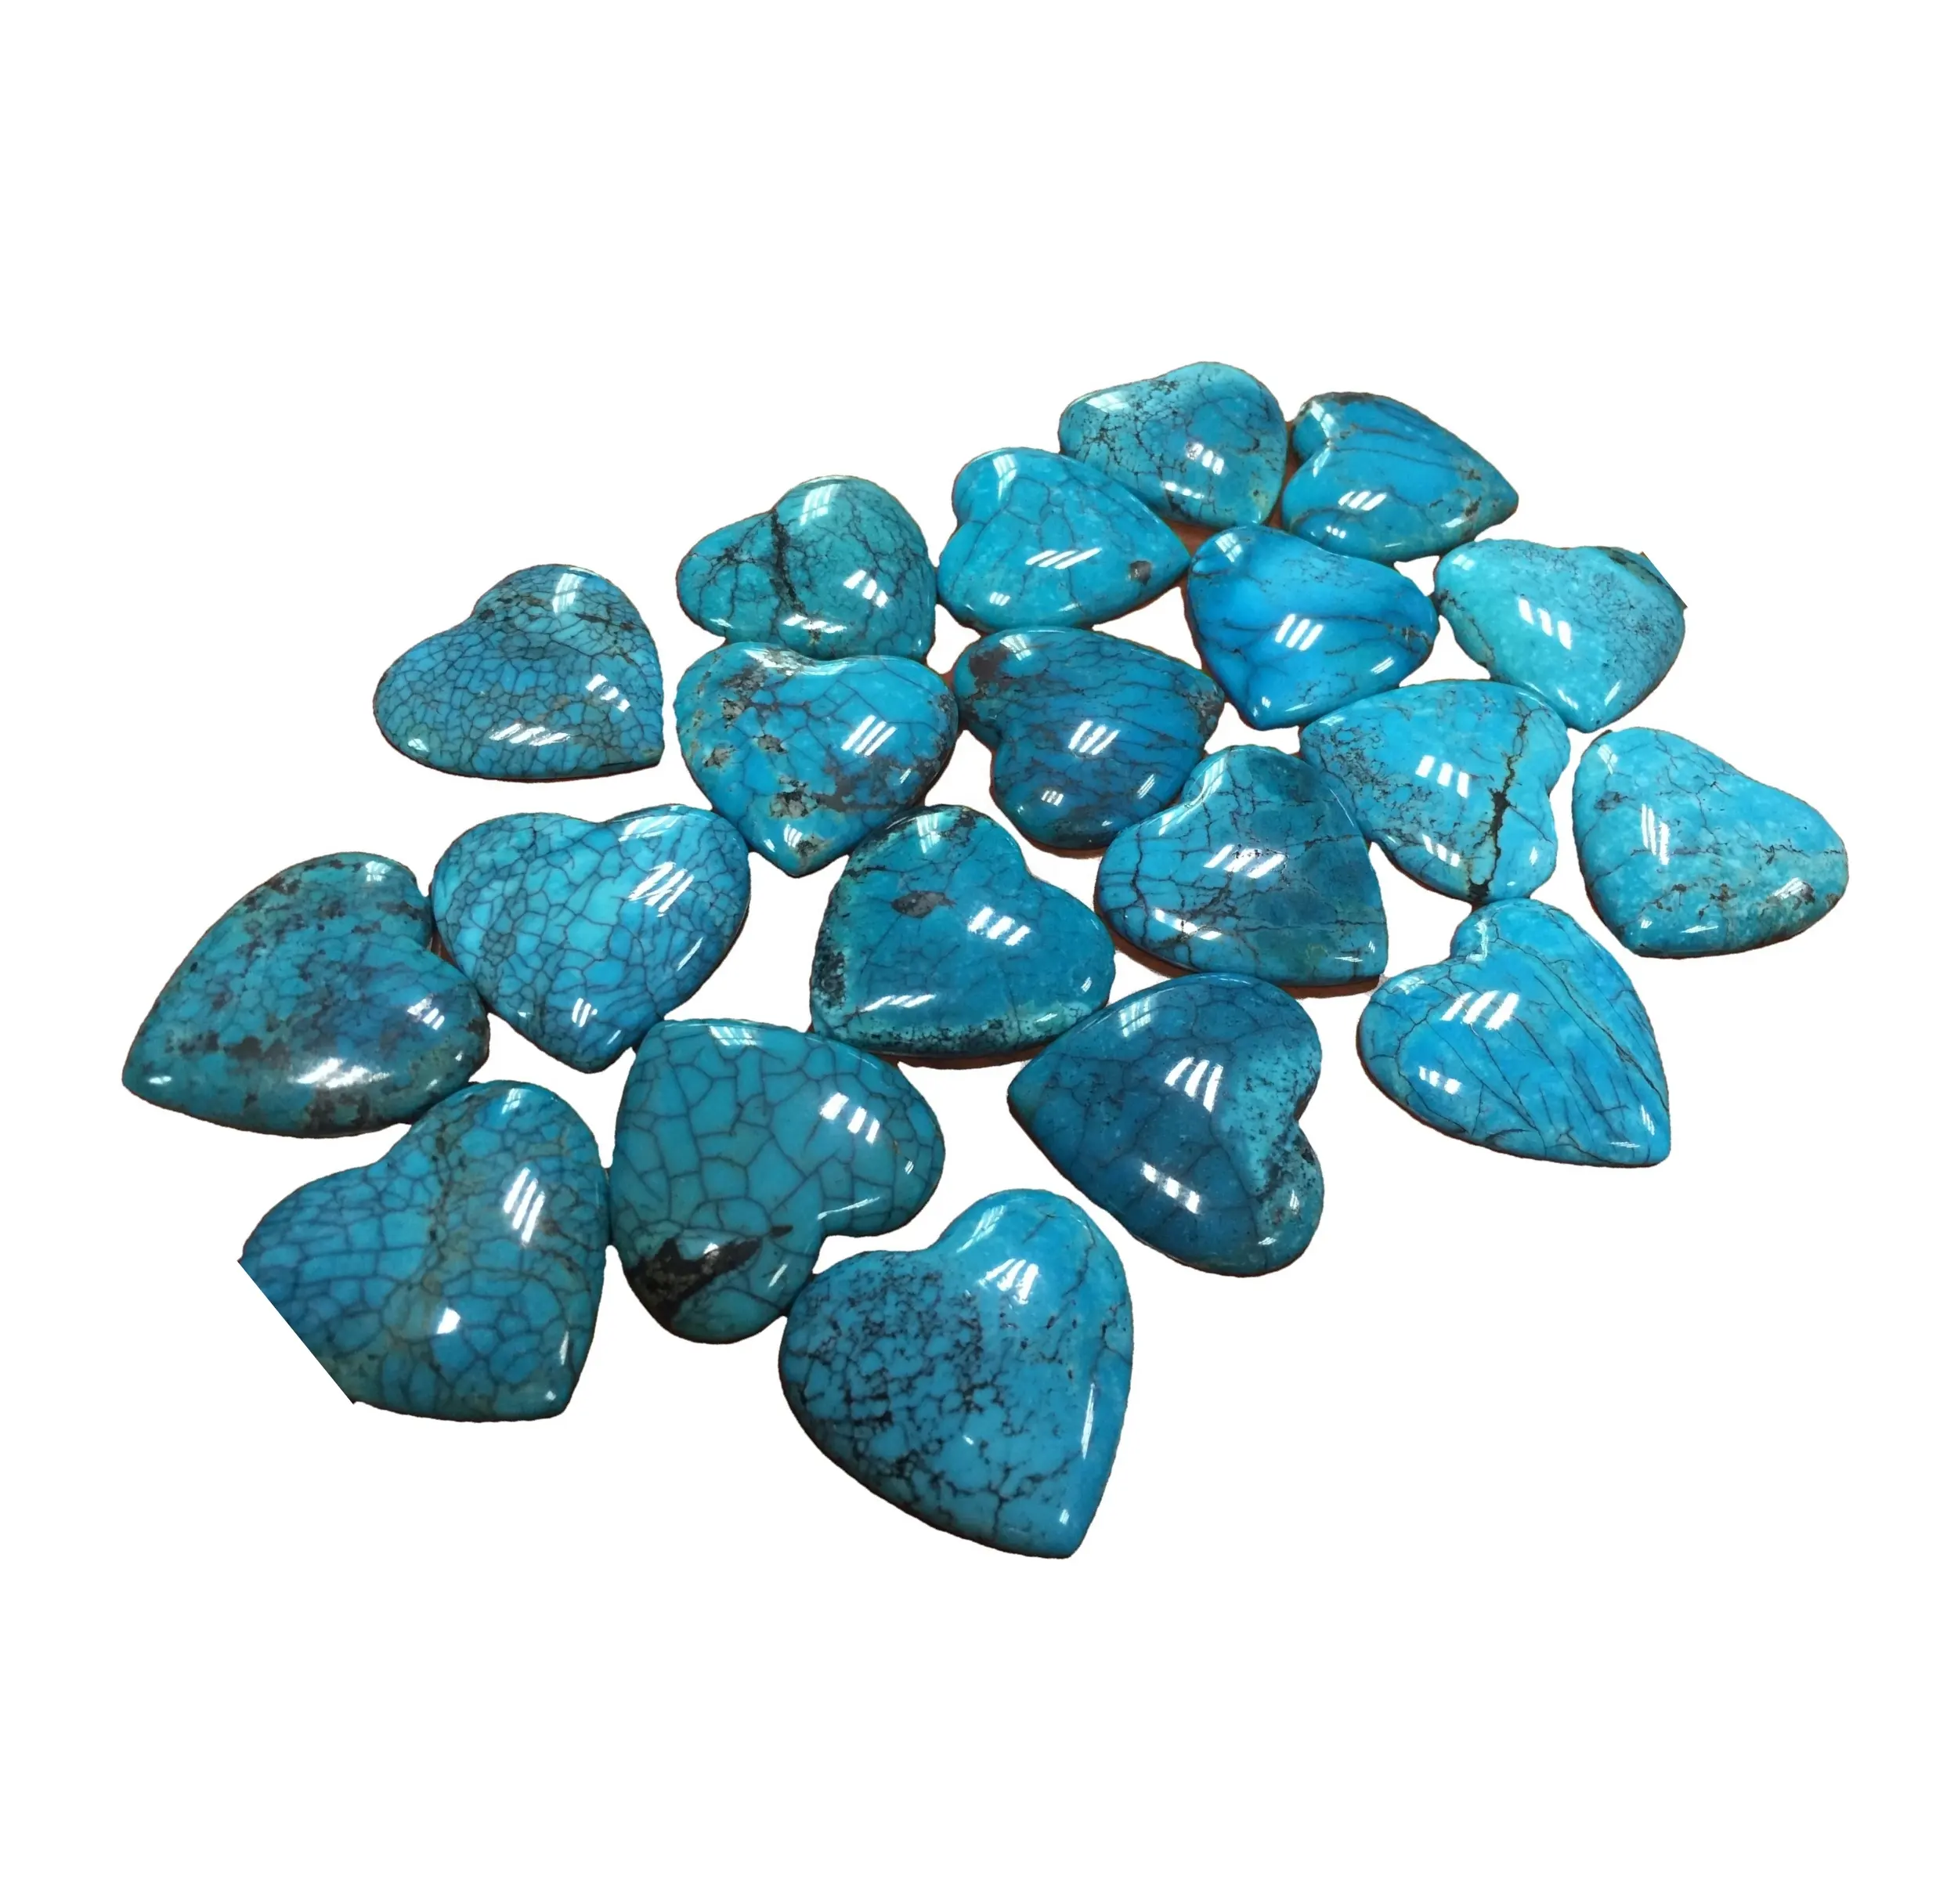 Natural turquoise heart beads jewelry 100% Natural Web Moon Mine (Hubei) Turquoise Heart Cabochon Gemstone